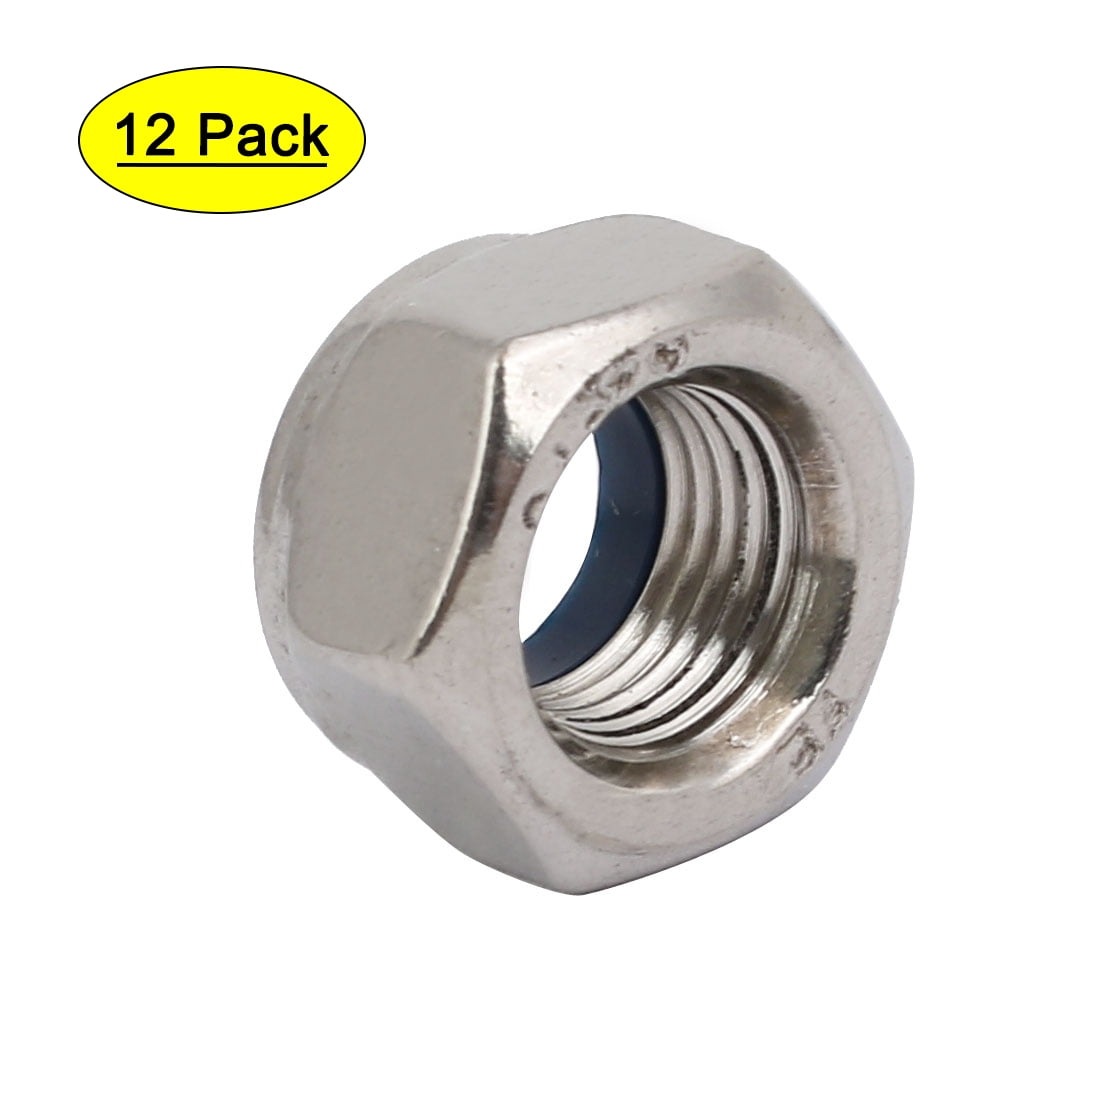 Metric Fine Thread Hex Nuts RH M24 x 1.5 Pitch 18-8 Stainless Steel 